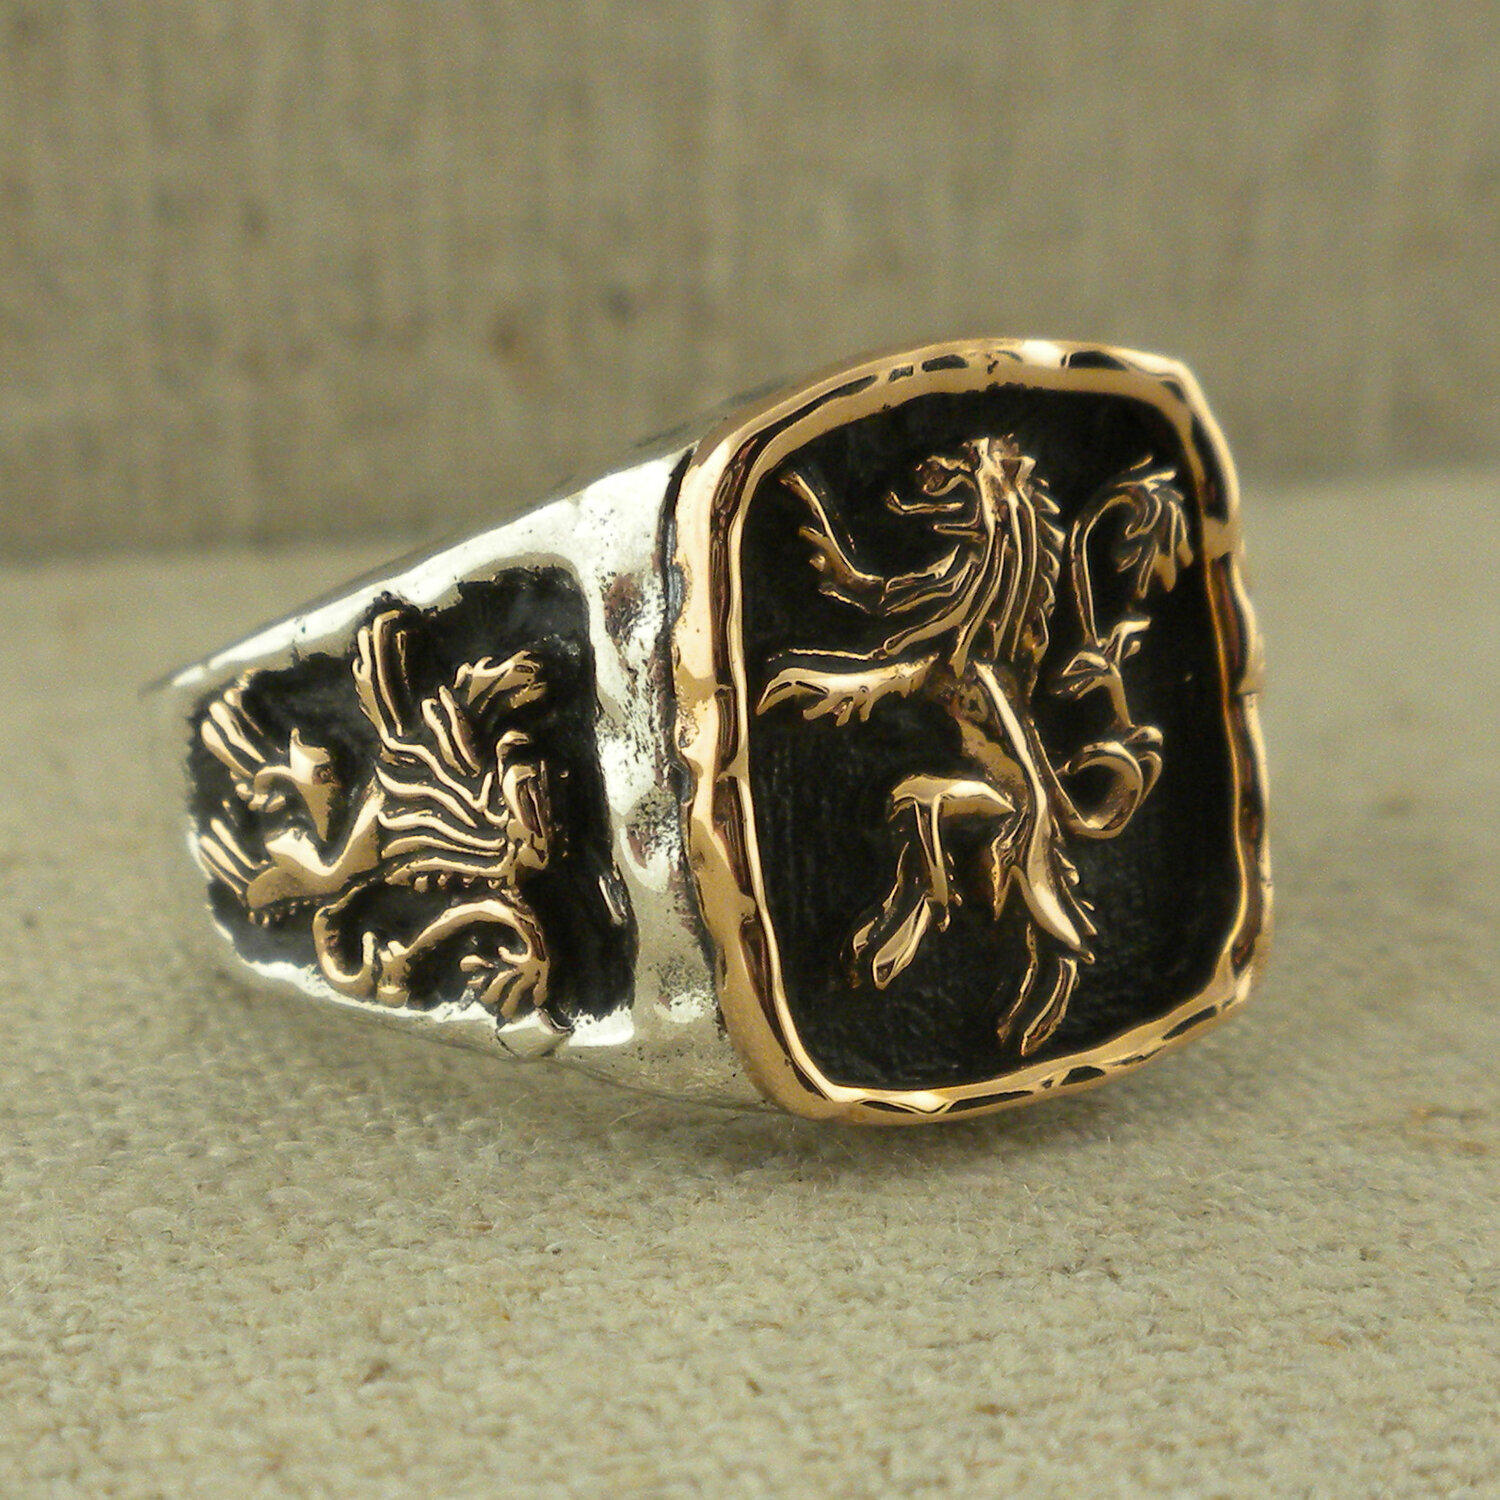 Bronze and Sterling Silver Scottish Rampant Signet Ring